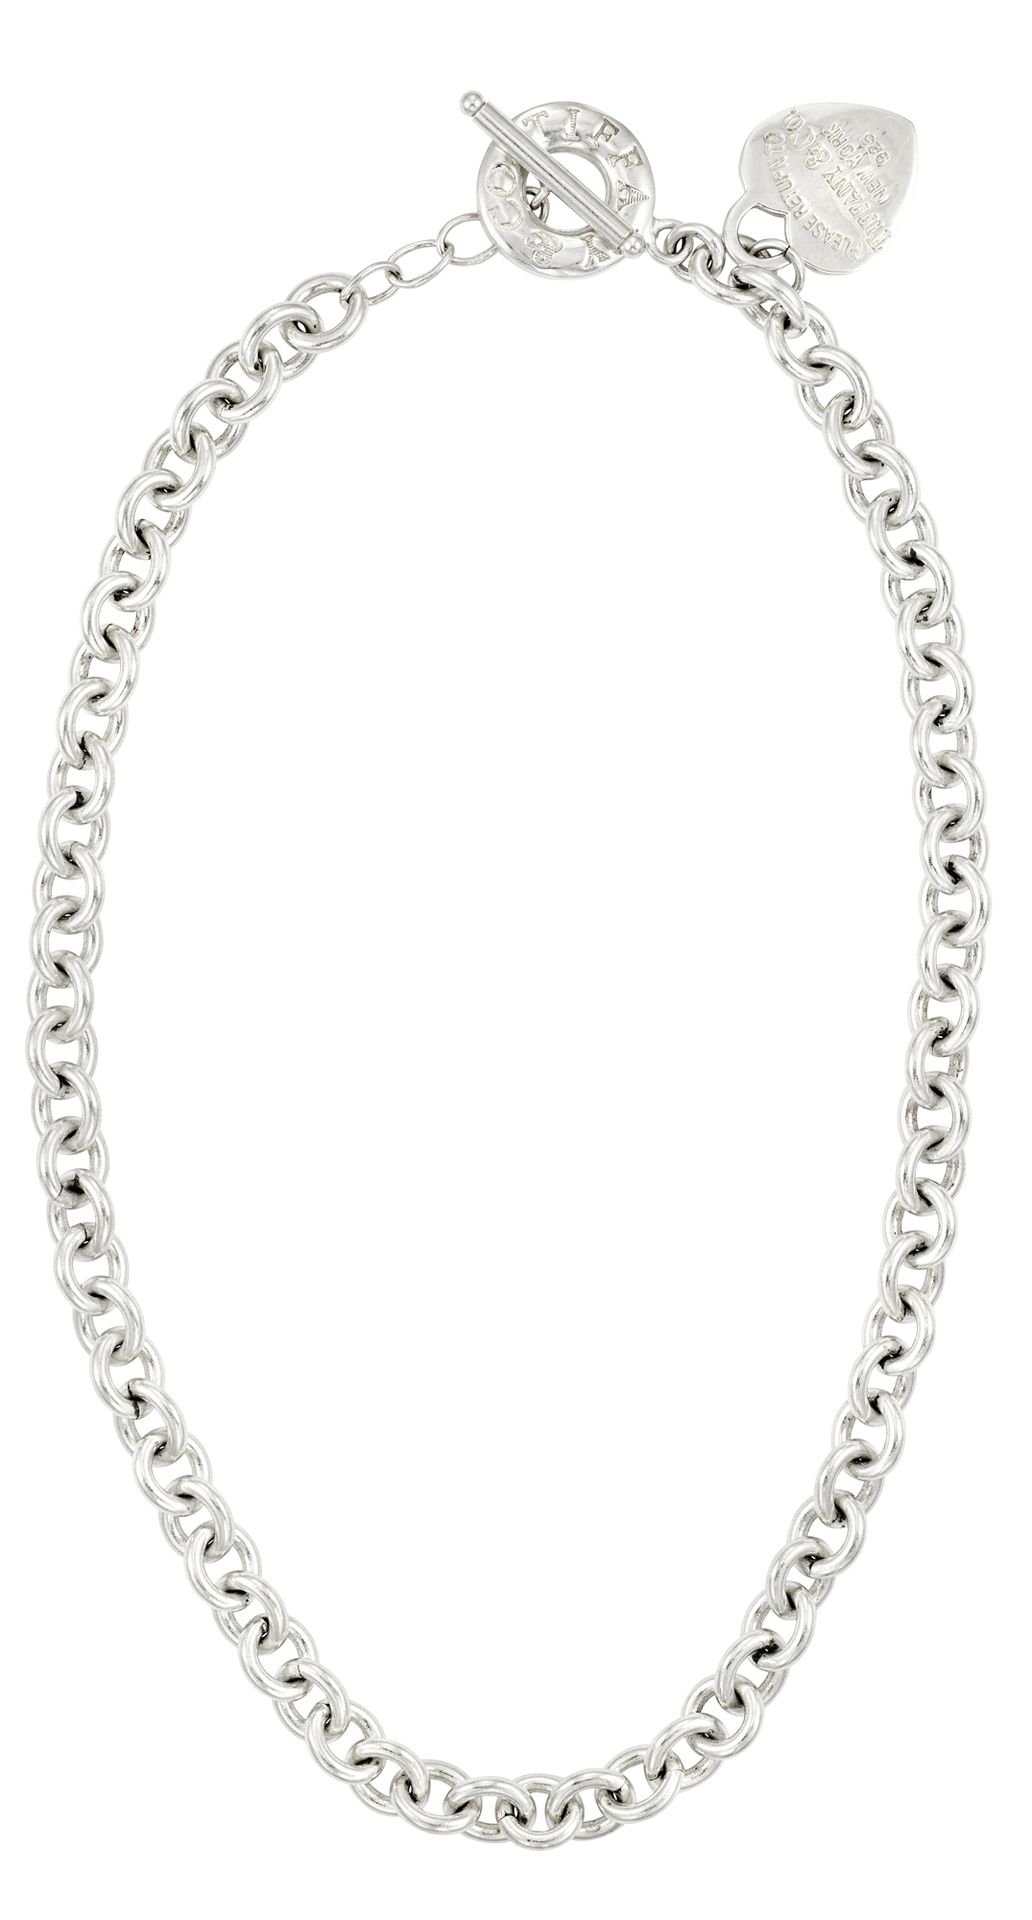 TIFFANY & CO Return to Tiffany" heart-shaped necklace in silver
Signed
L: 46 cm &hellip;